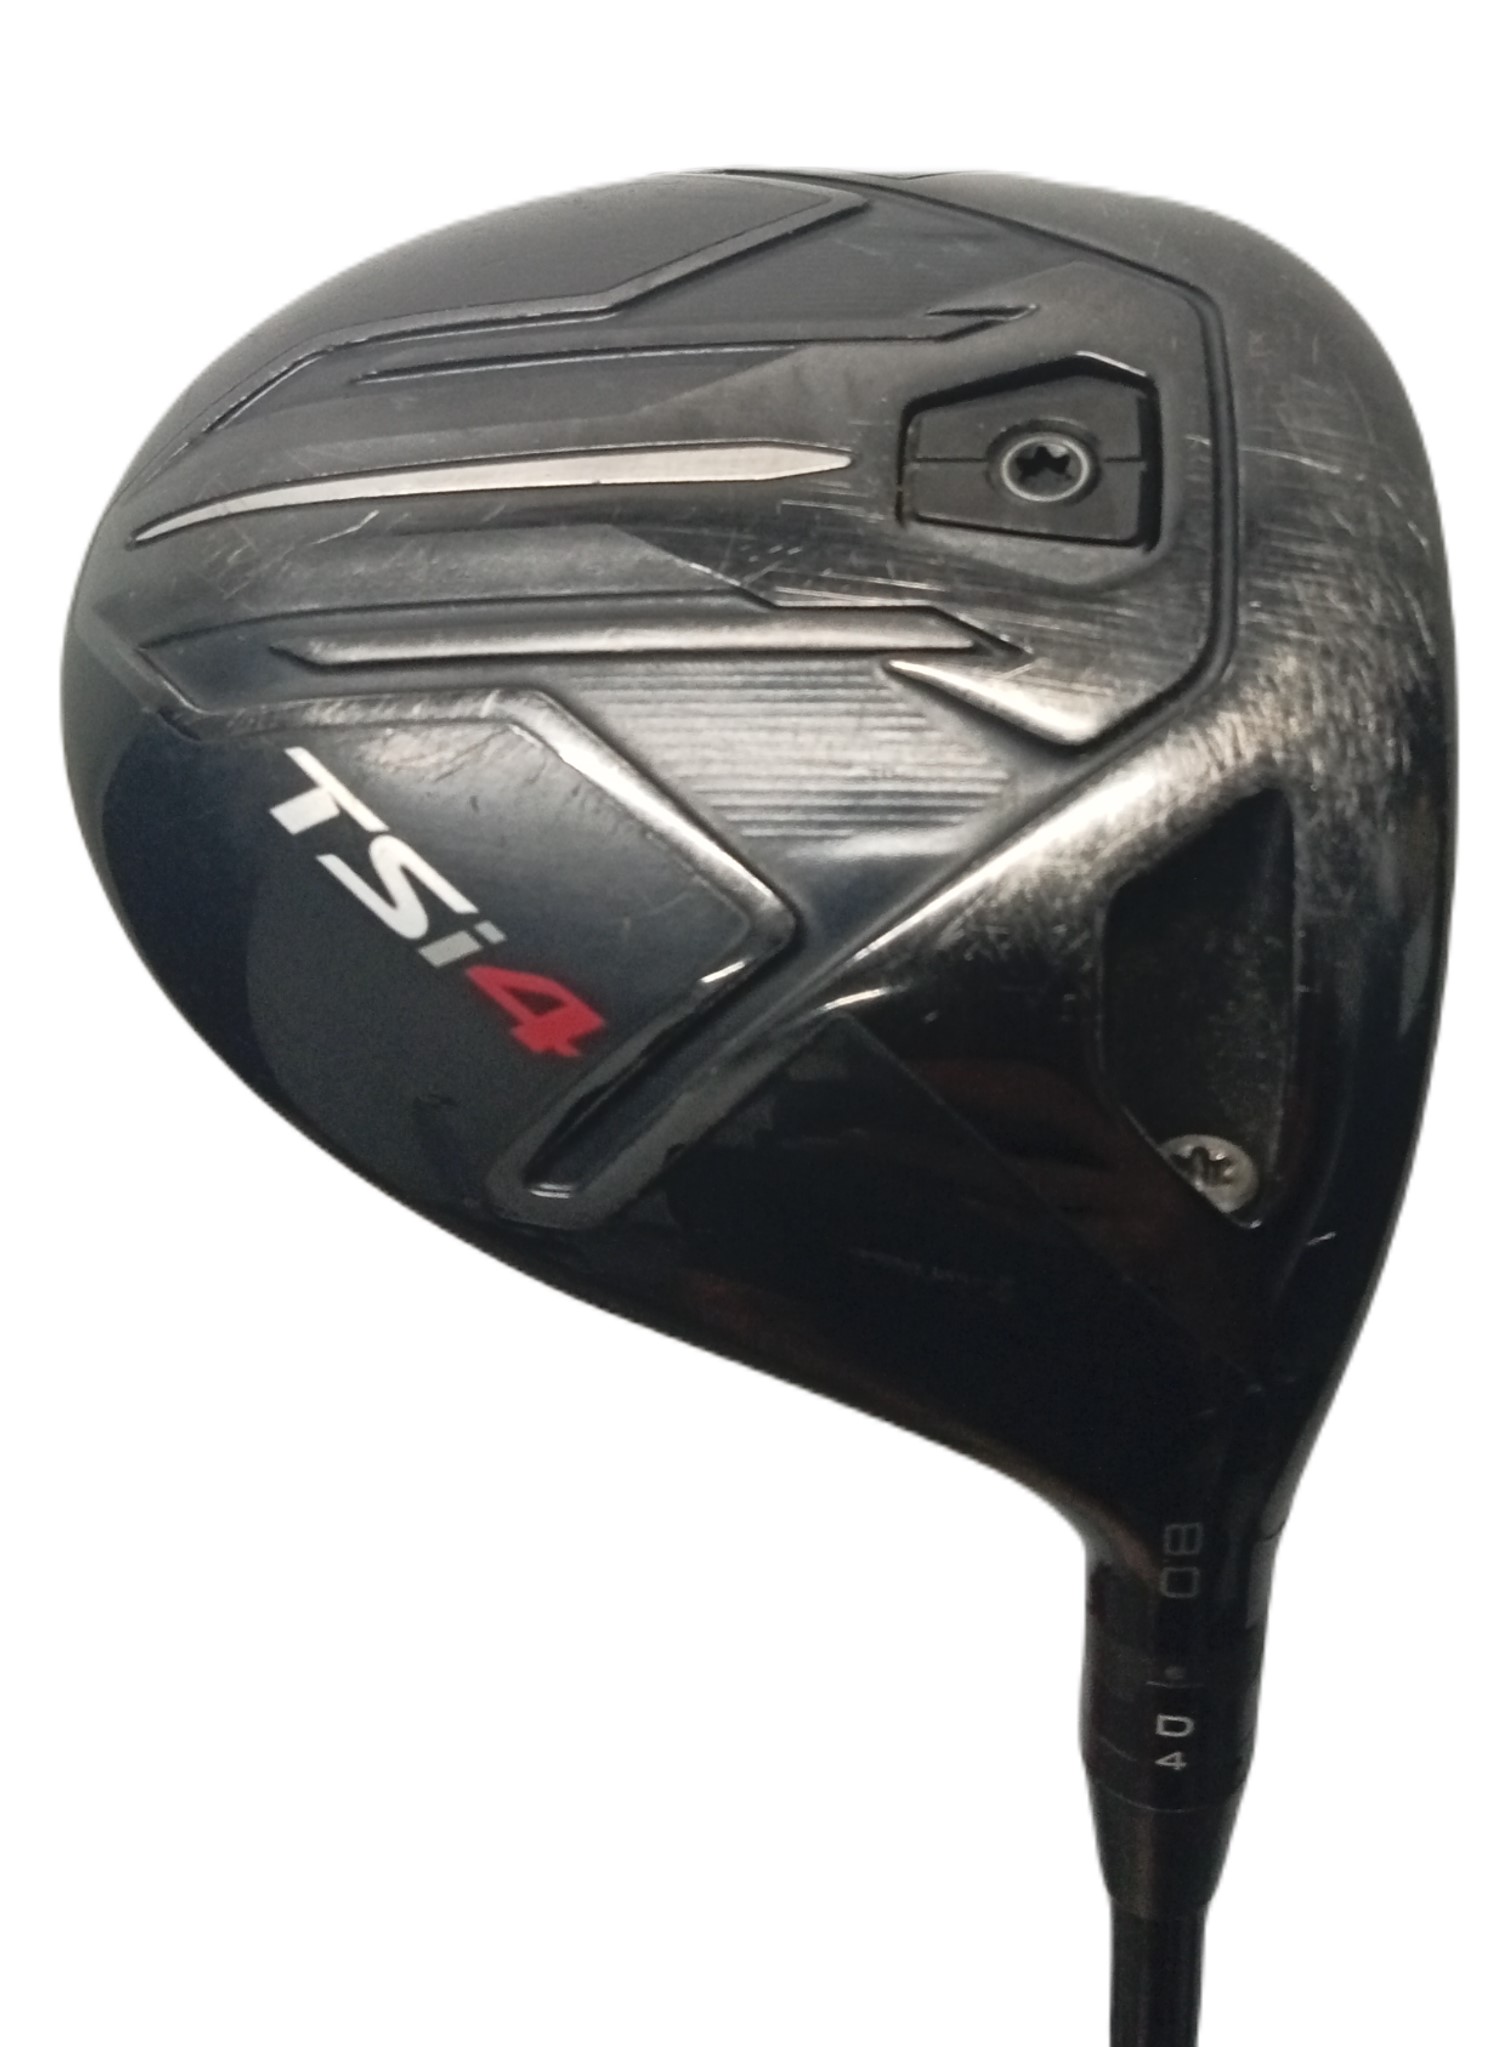 Pre-owned Titleist TSI4 Men's Driver